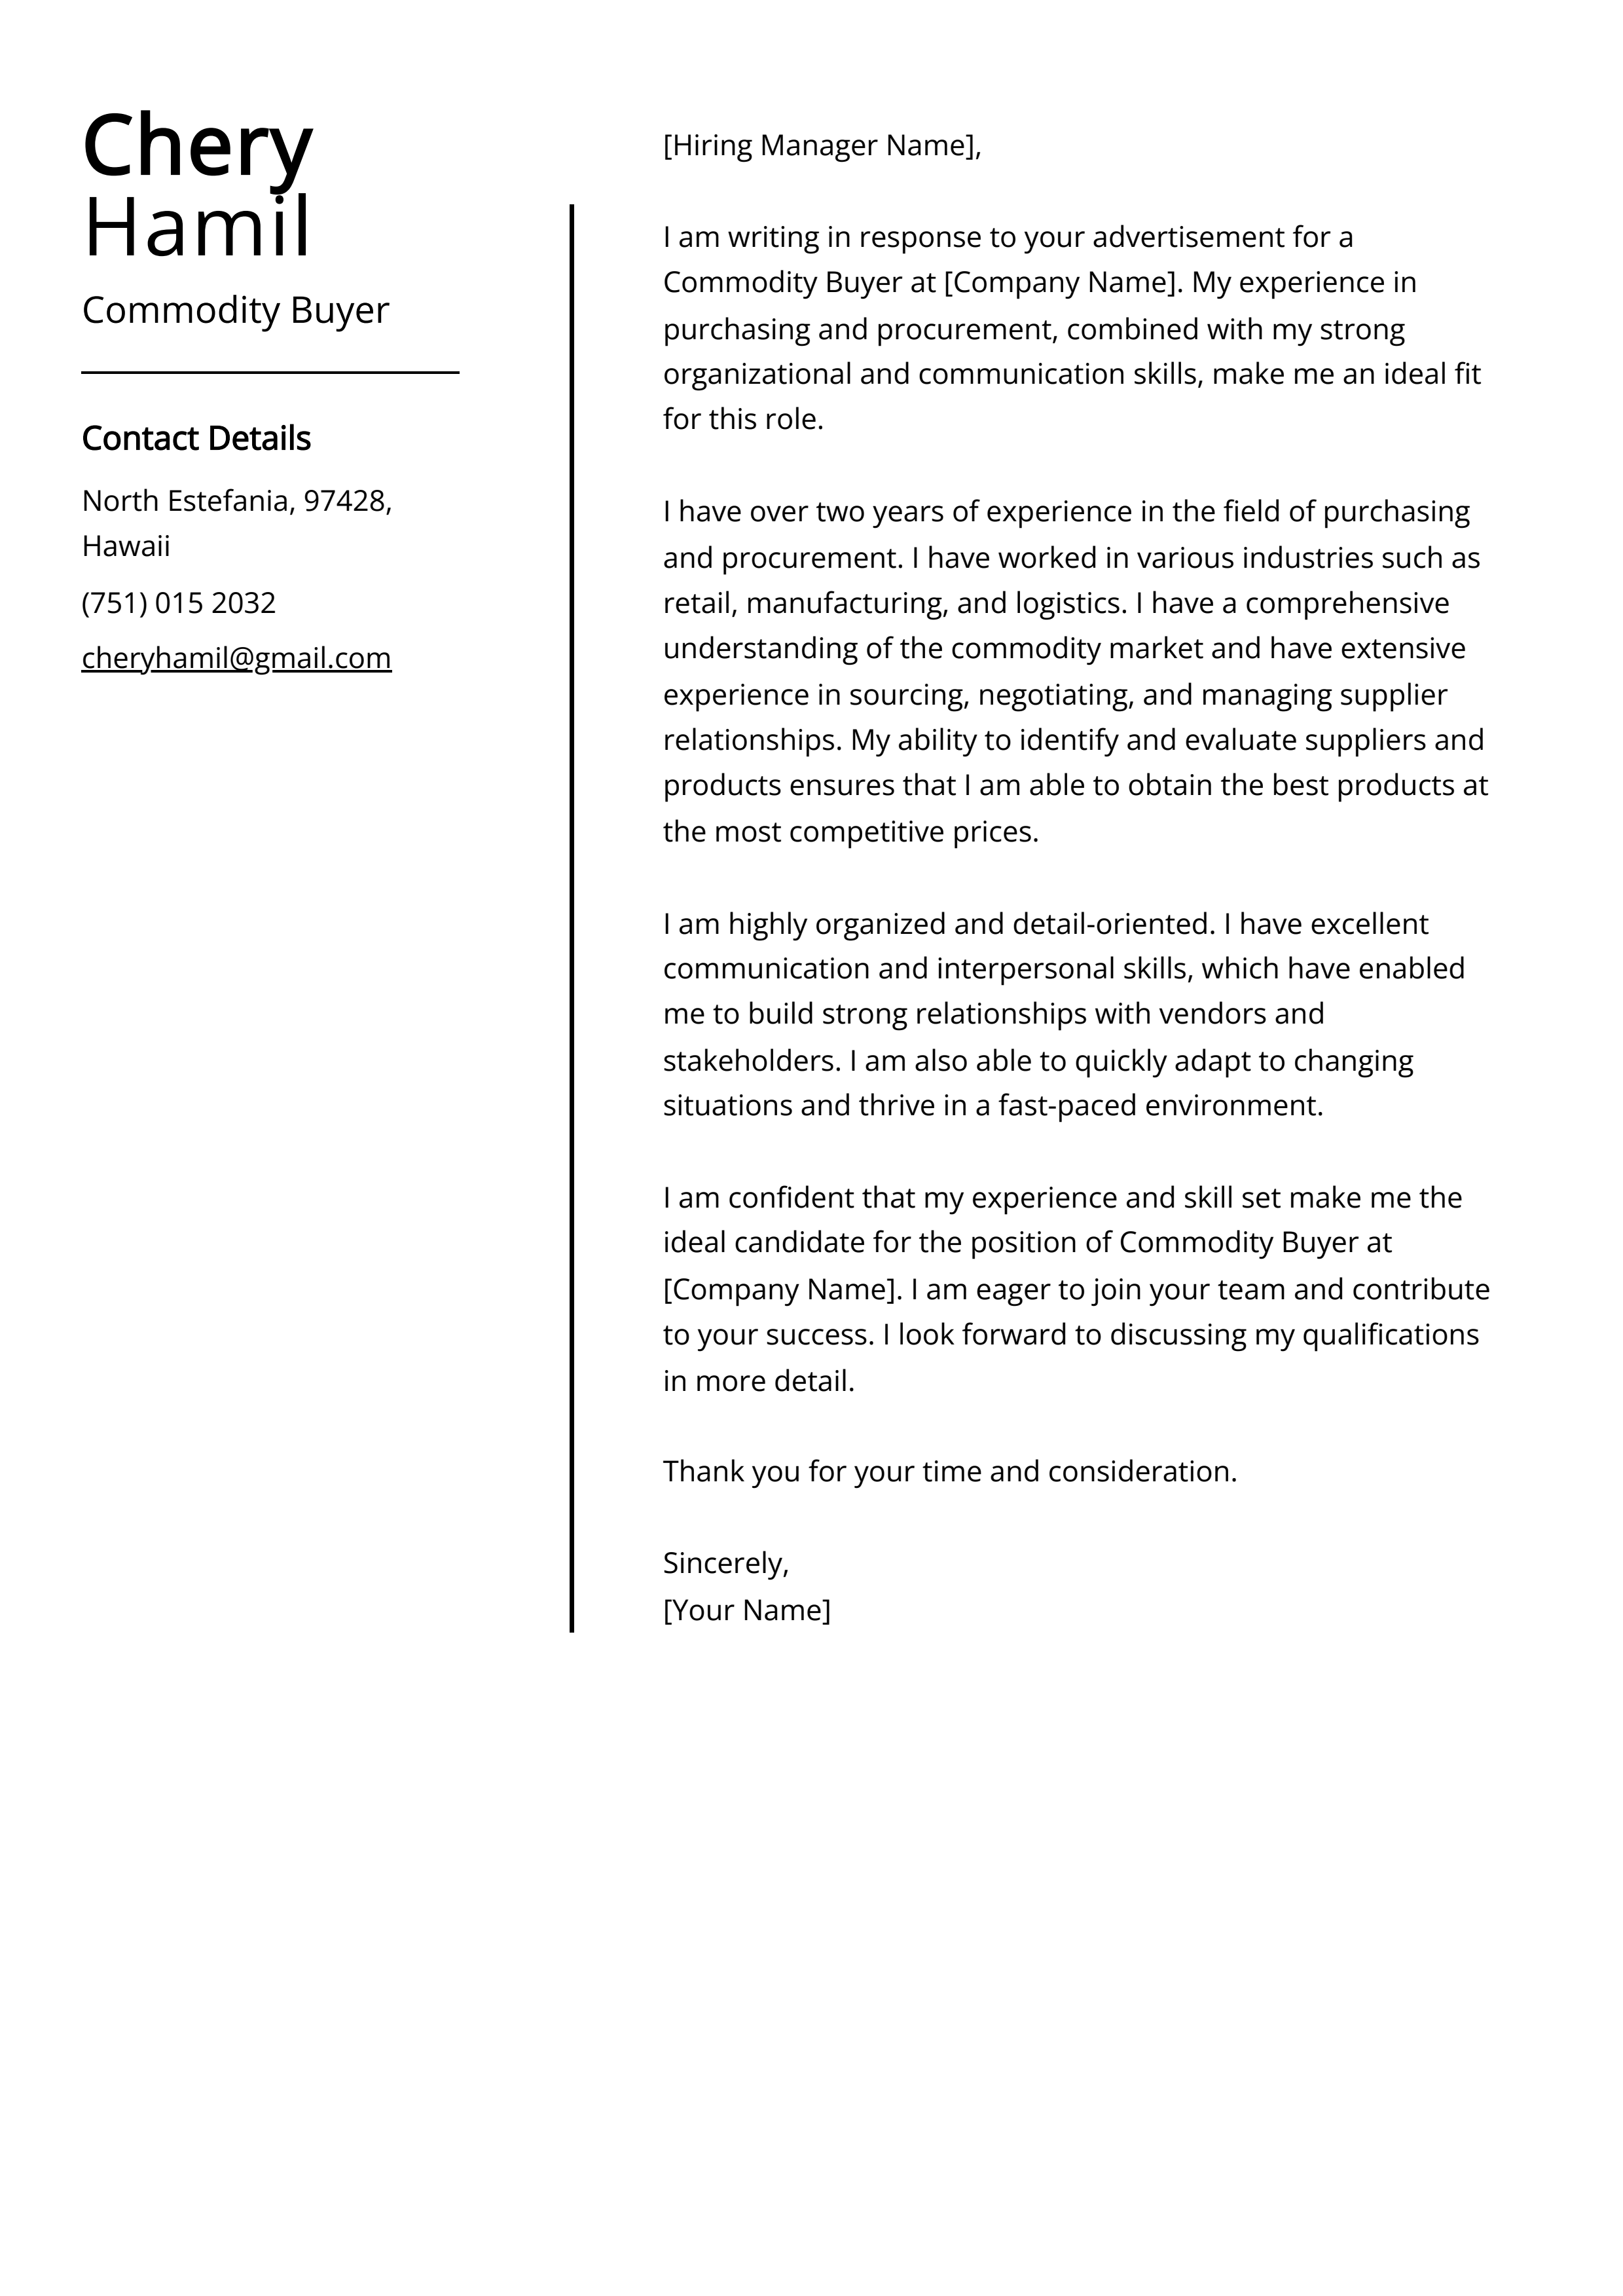 Commodity Buyer Cover Letter Example